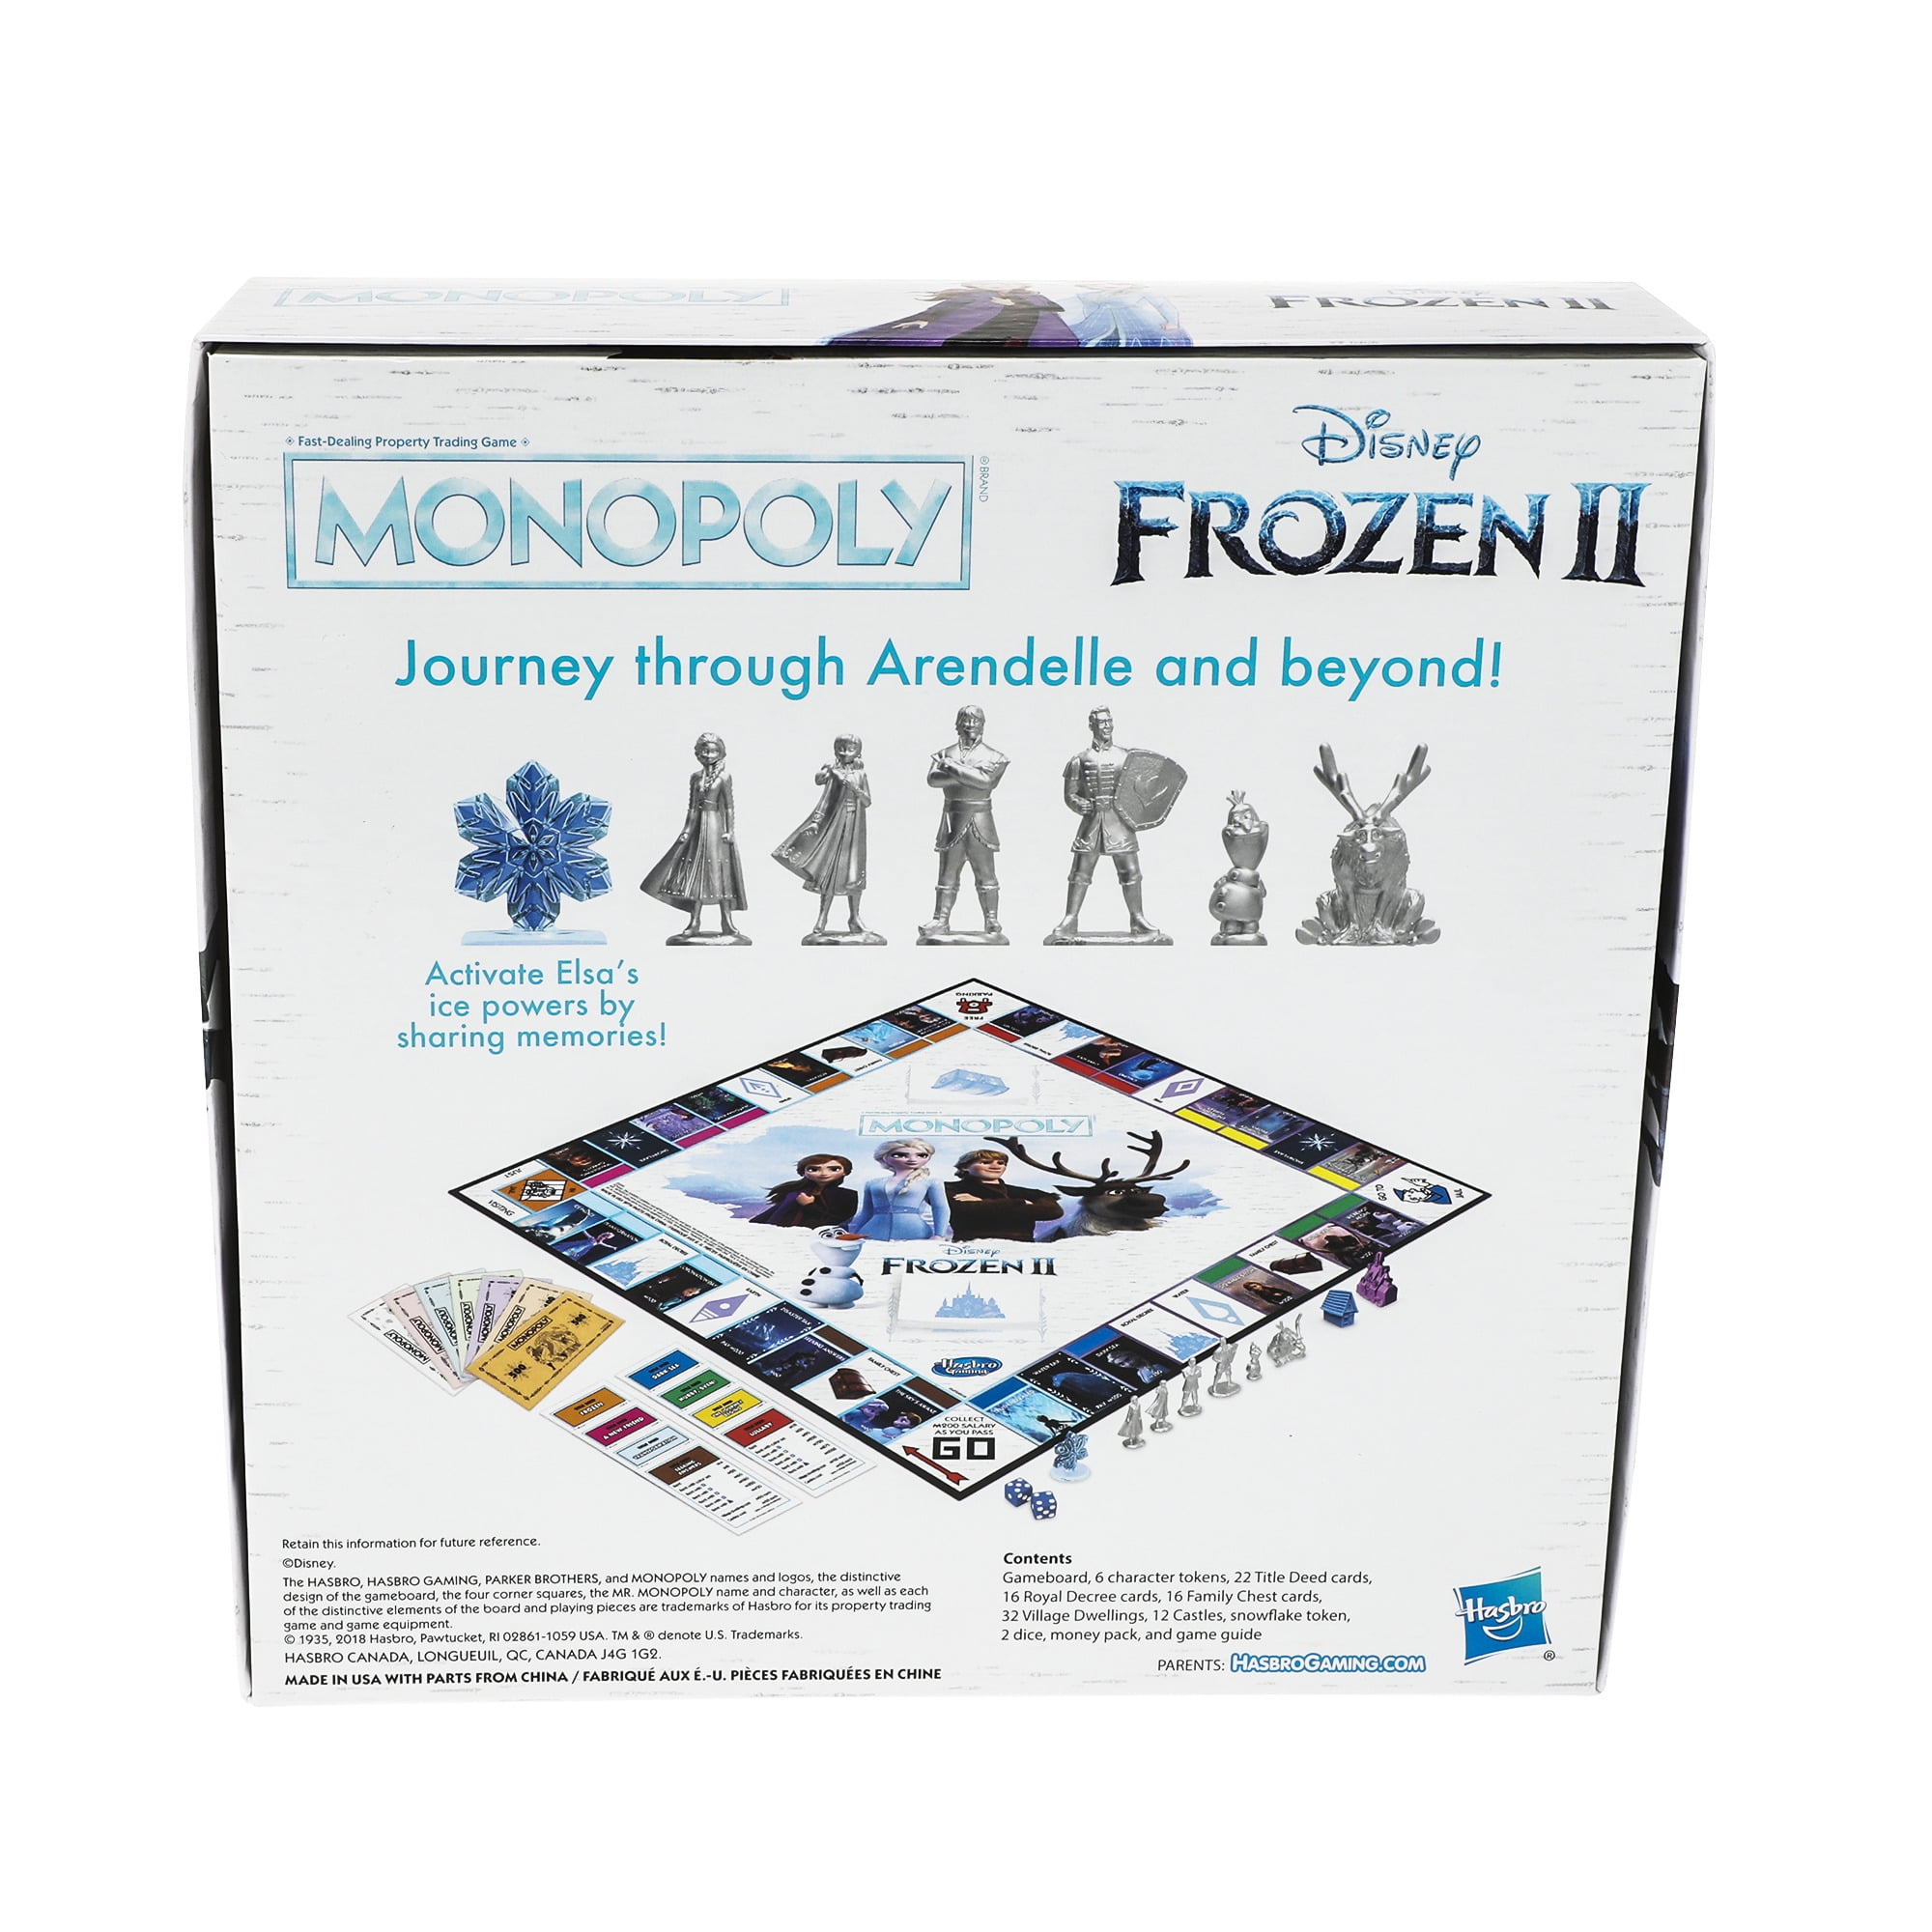 REPLACEMENTS PICK YOUR PARTS Monopoly Frozen 2 II Edition Board Game SPARES 